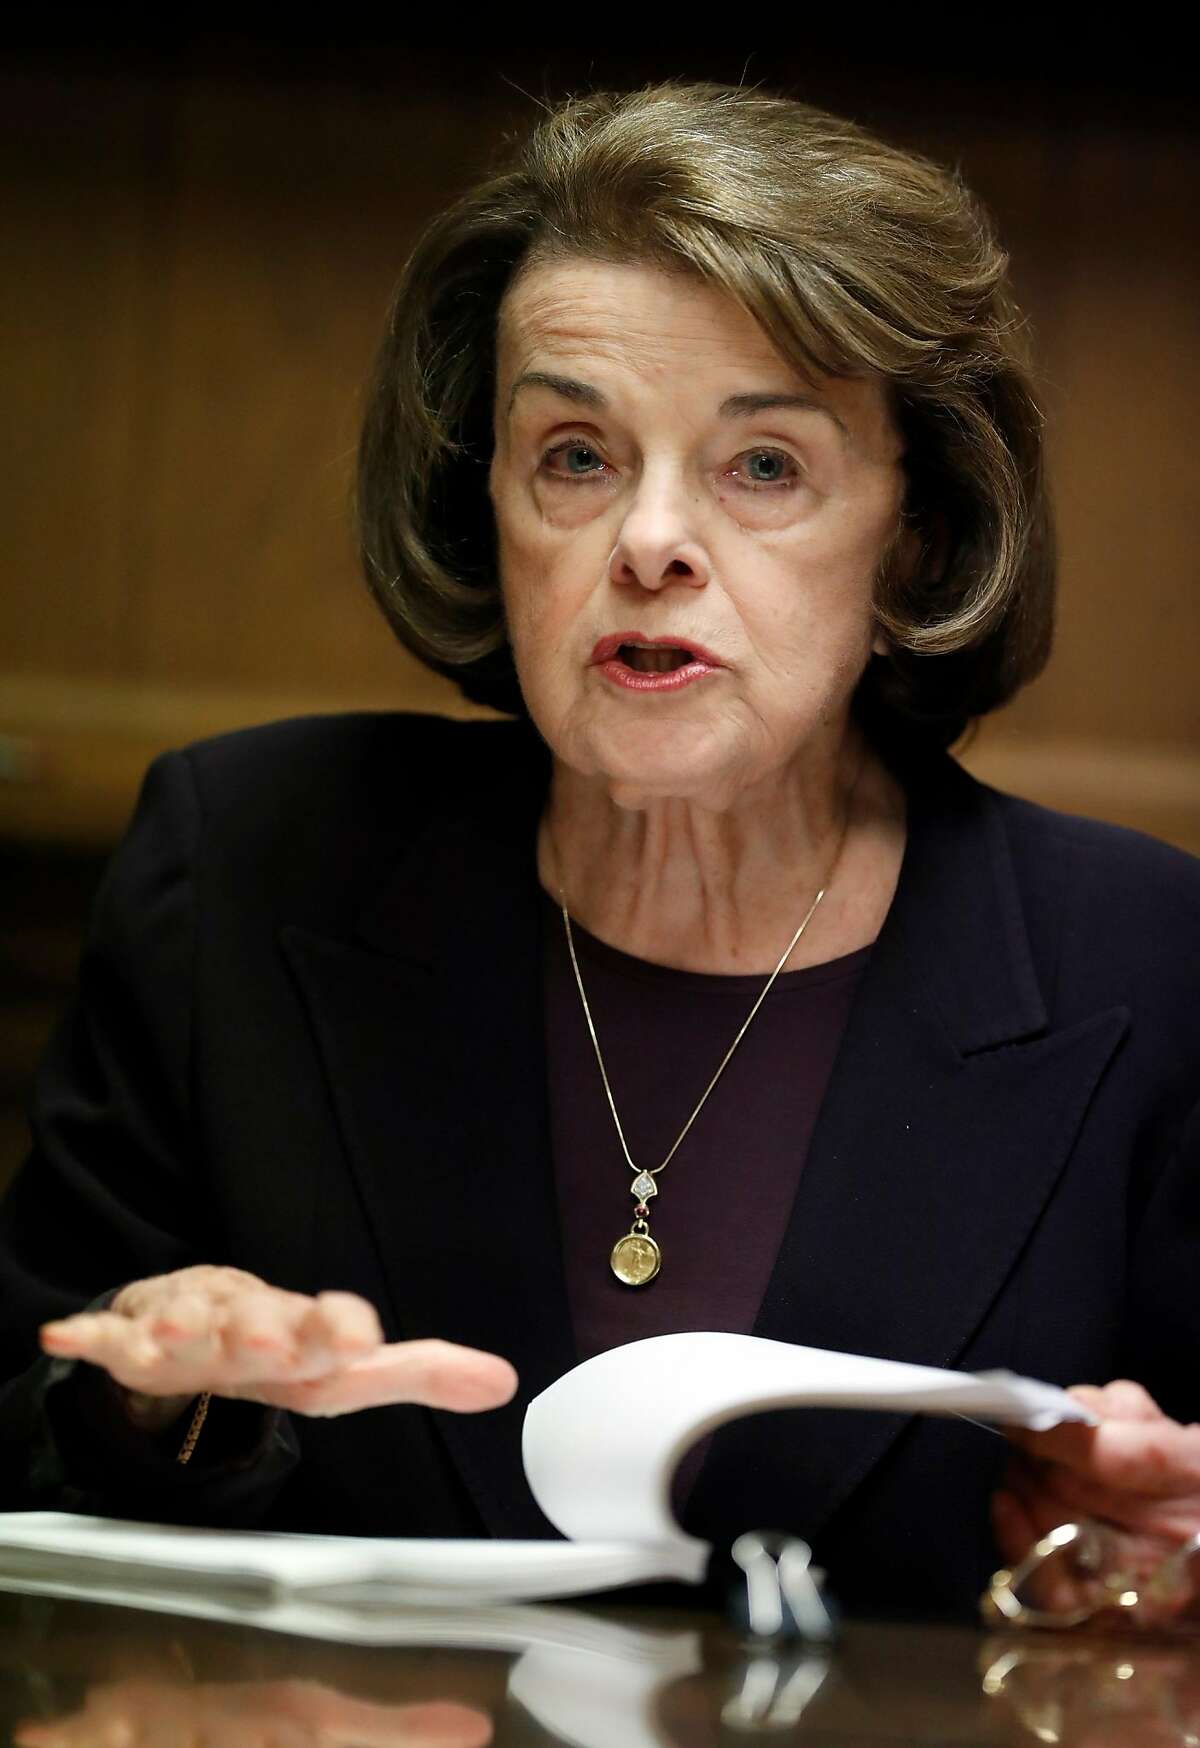 United States' Senator Dianne Feinstein talks to the San Francisco Chronicle Editorial Board in San Francisco, Calif., on Tuesday, April 3, 2018.